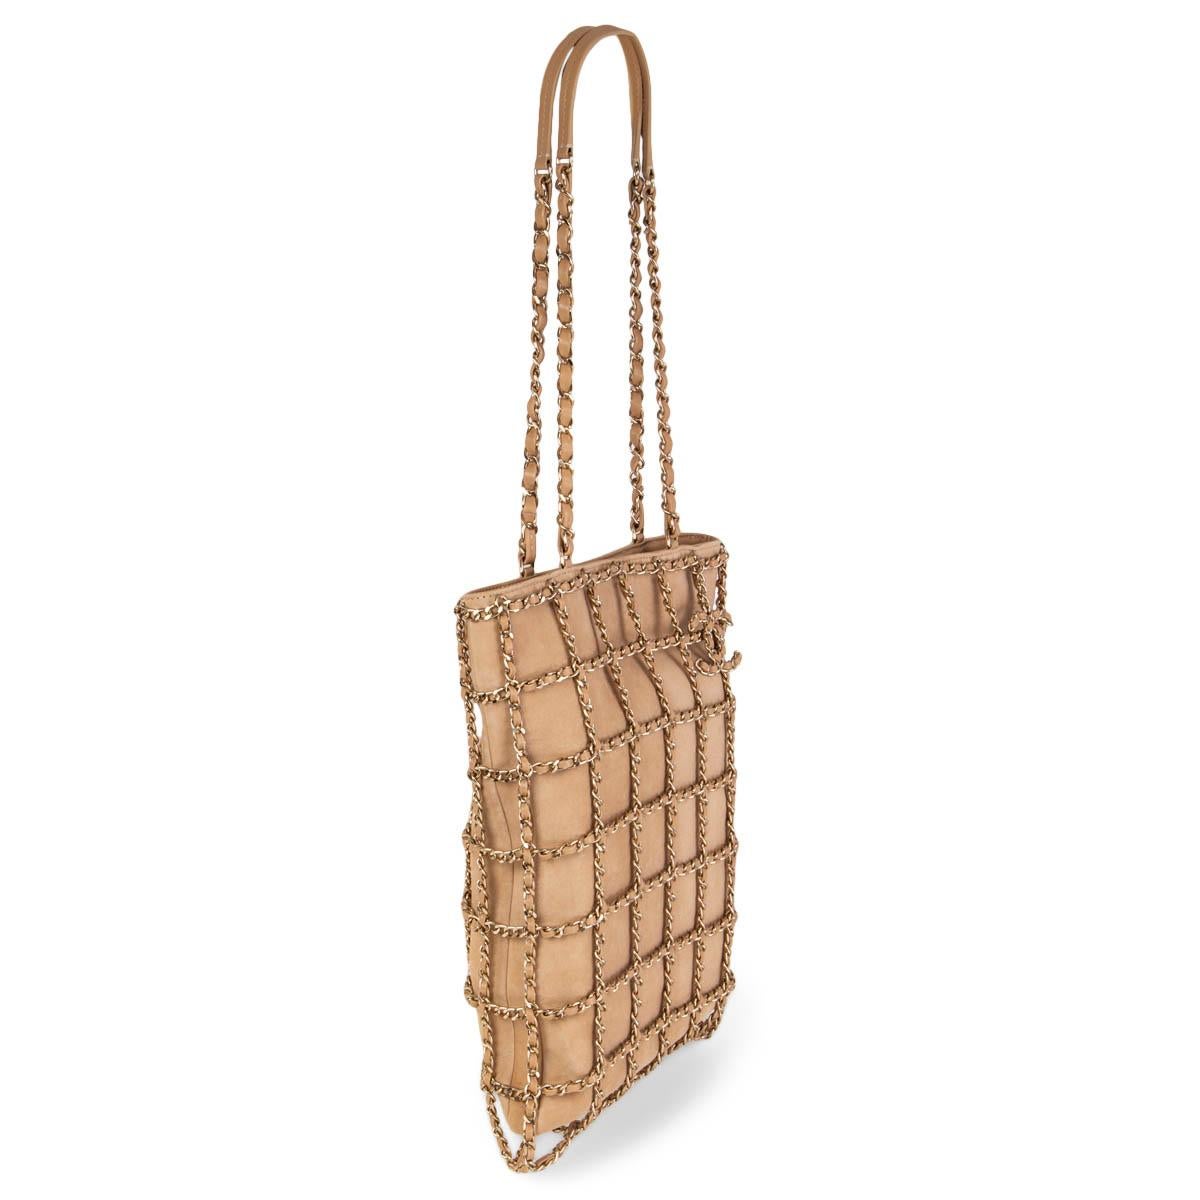 100% authentic Chanel Cruise 2020 large shopping chain tote in beige suede featuring light gold-tone metal chain and calfskin braided cage. Opens with a magnetic button on top and is lined in eggplant colored grosgrain fabric with a zipper pocket